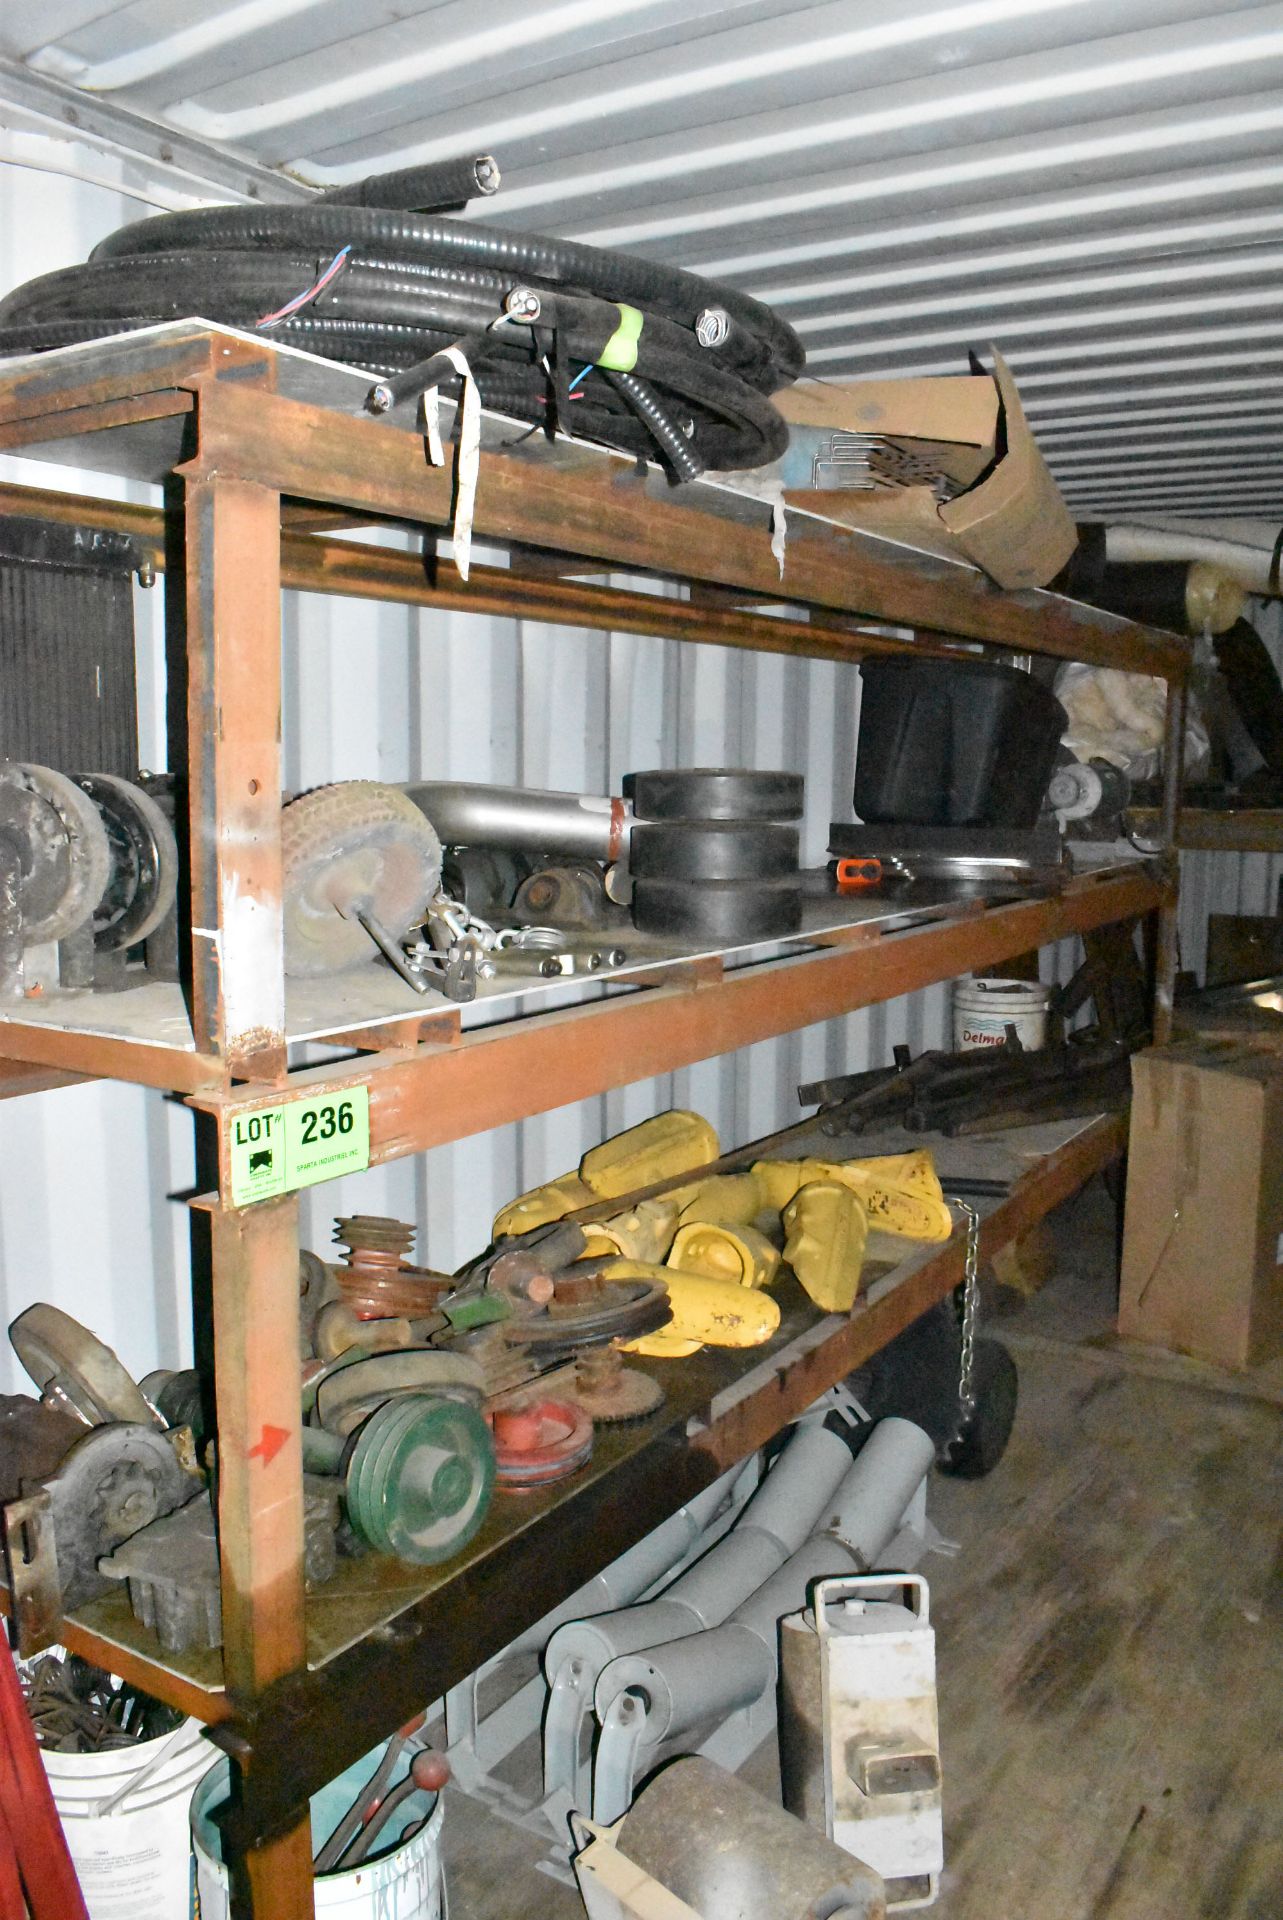 LOT/ REMAINING CONTENTS OF CONTAINER CONSISTING OF SPARE PARTS, FLY WHEELS, WIRE, ROLLERS AND BUCKET